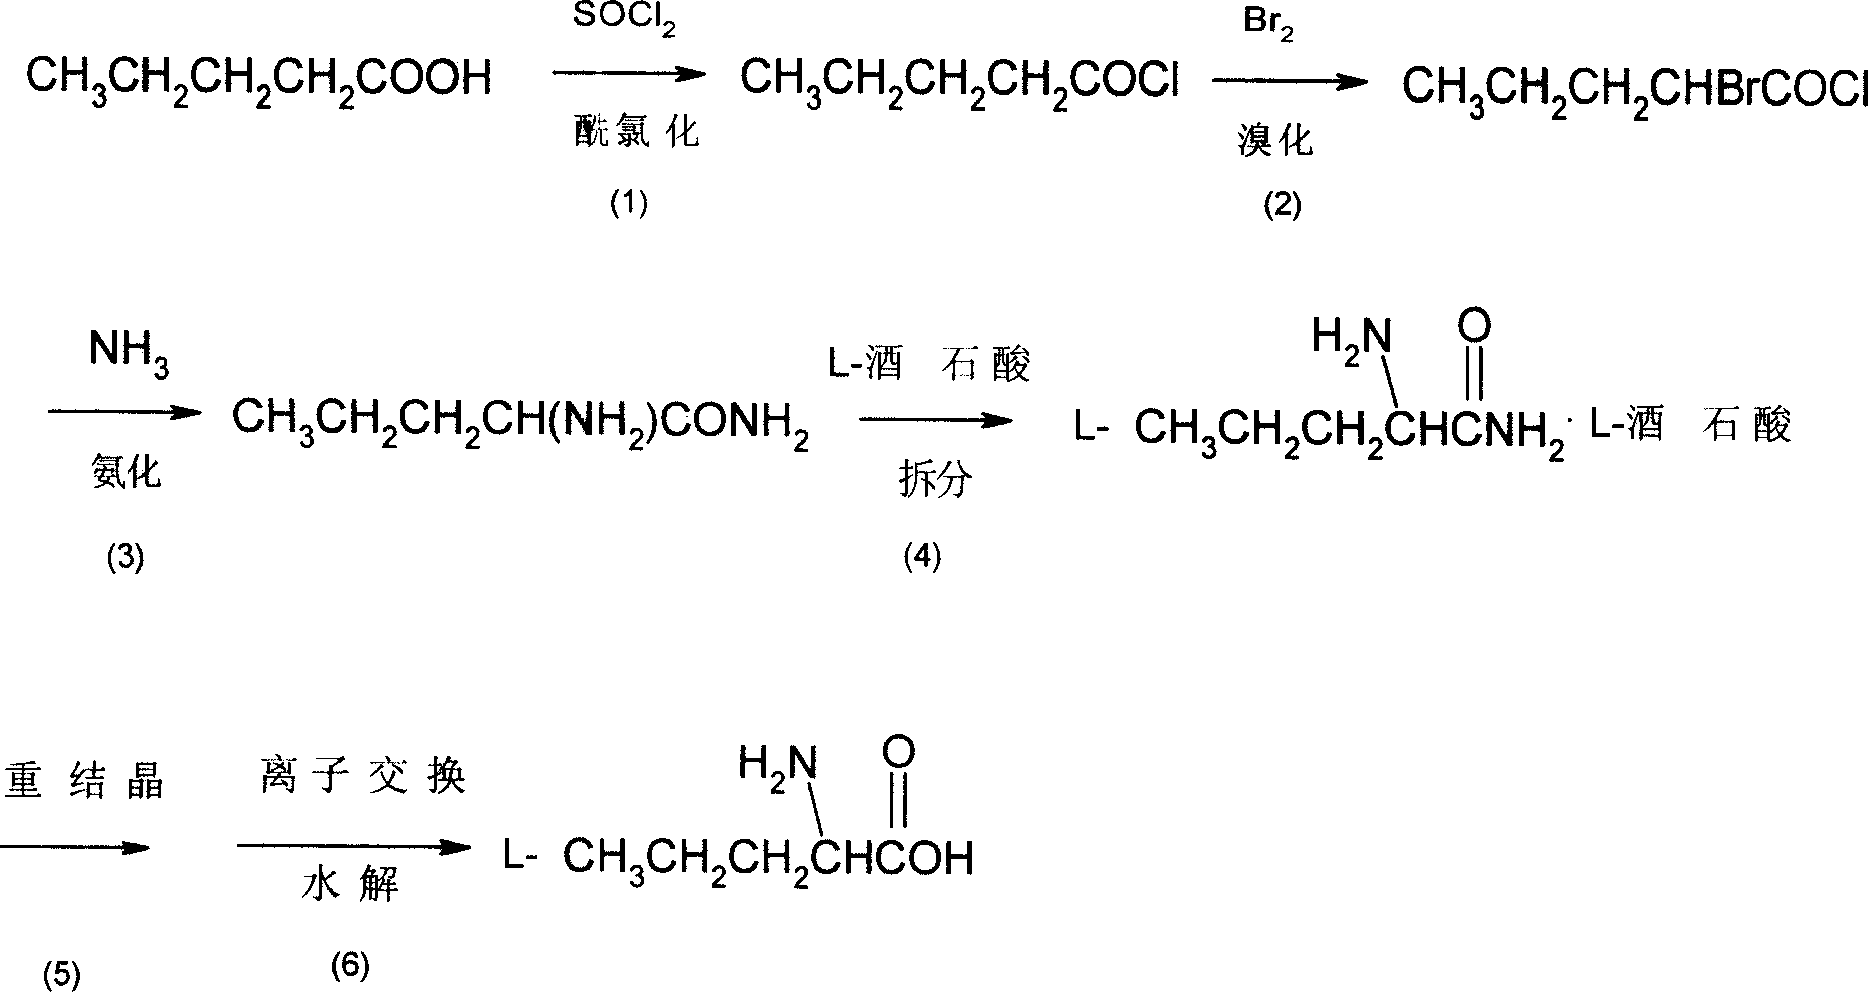 Method for synthesis of L-norvaline